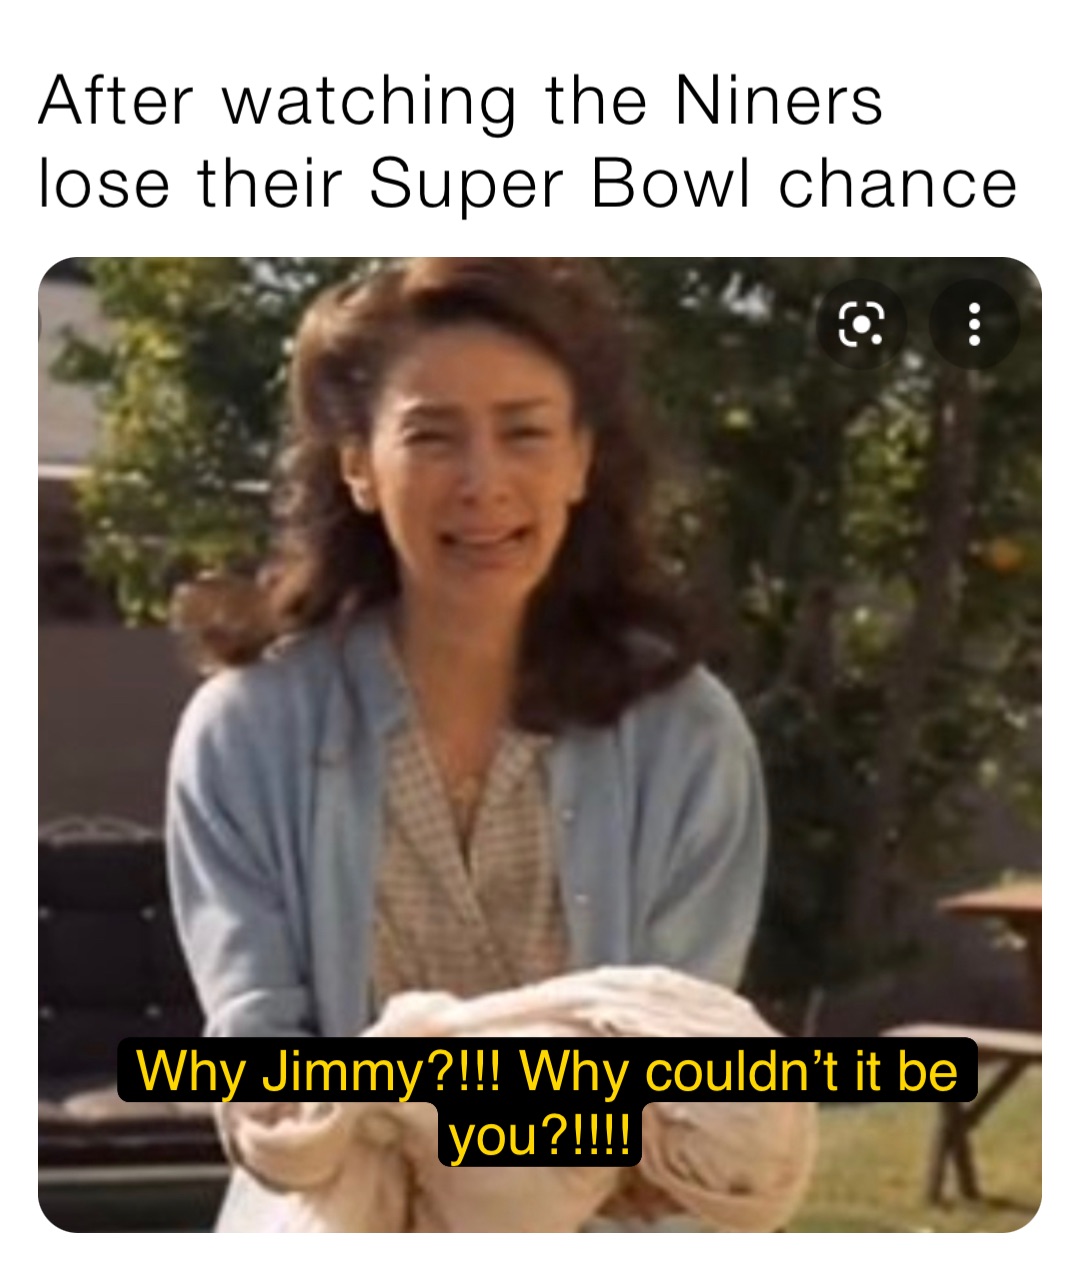 After watching the Niners lose their Super Bowl chance Why Jimmy?!!! Why couldn’t it be you?!!!!